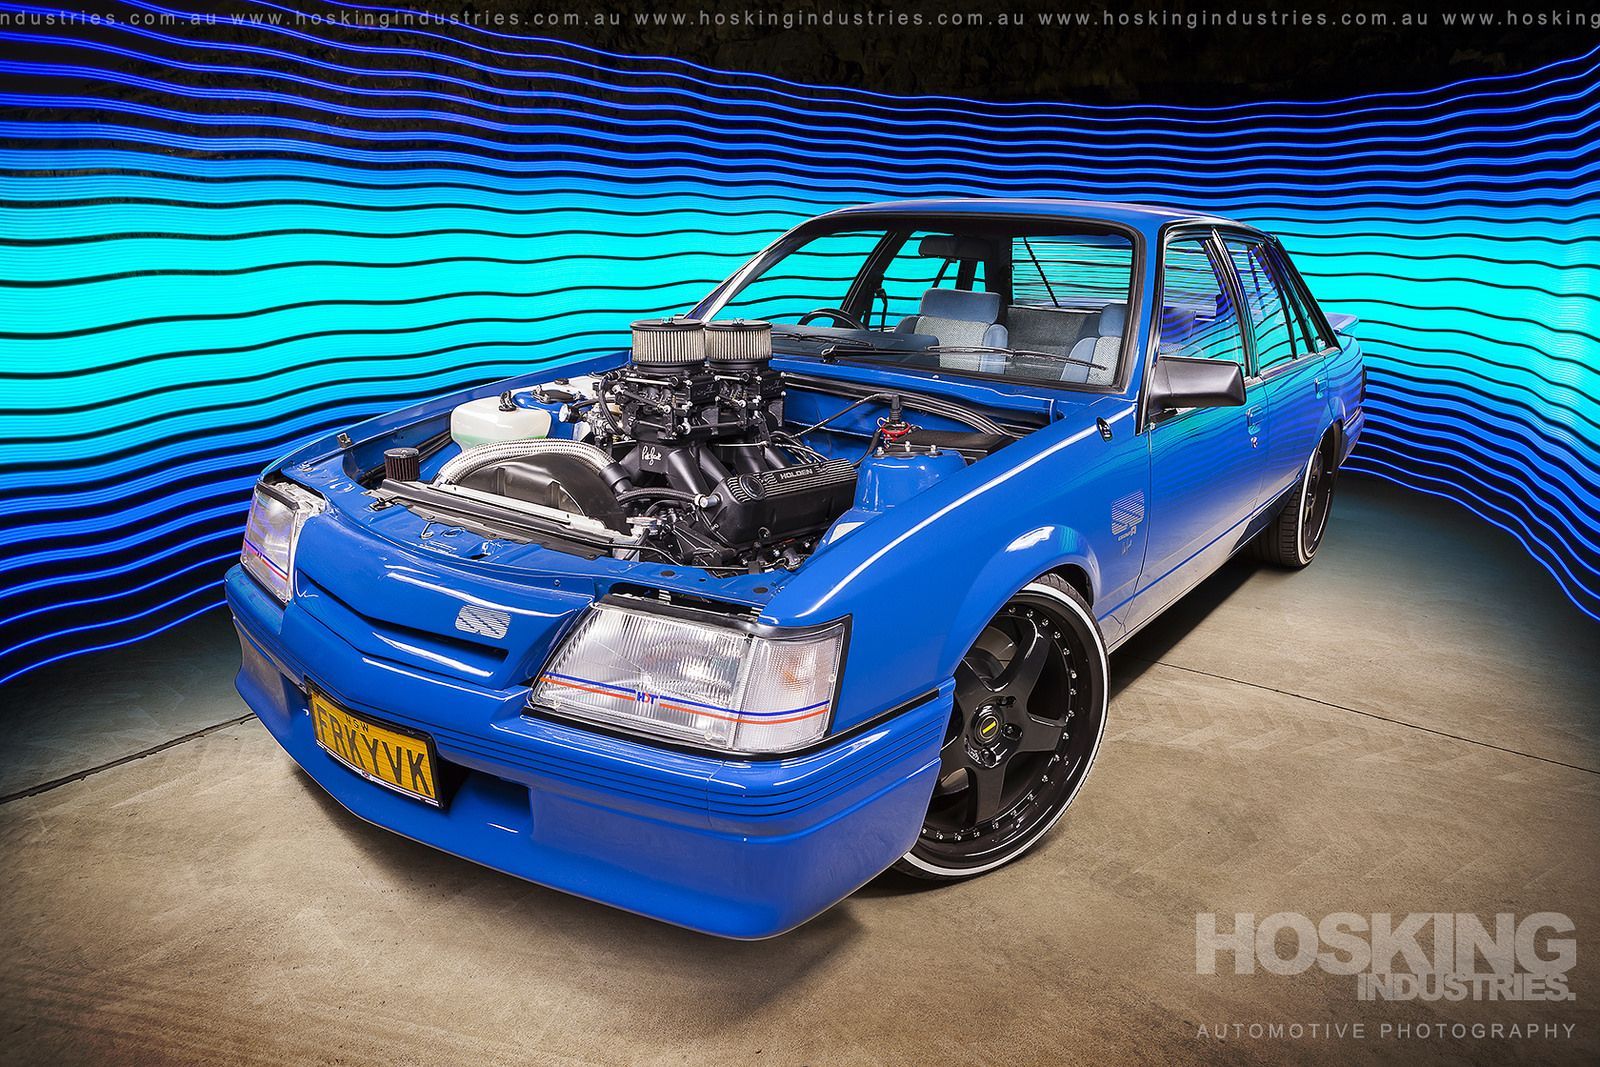 Nick Sassine's Holden VK Commodore. Best muscle cars, Aussie muscle cars, Australian cars